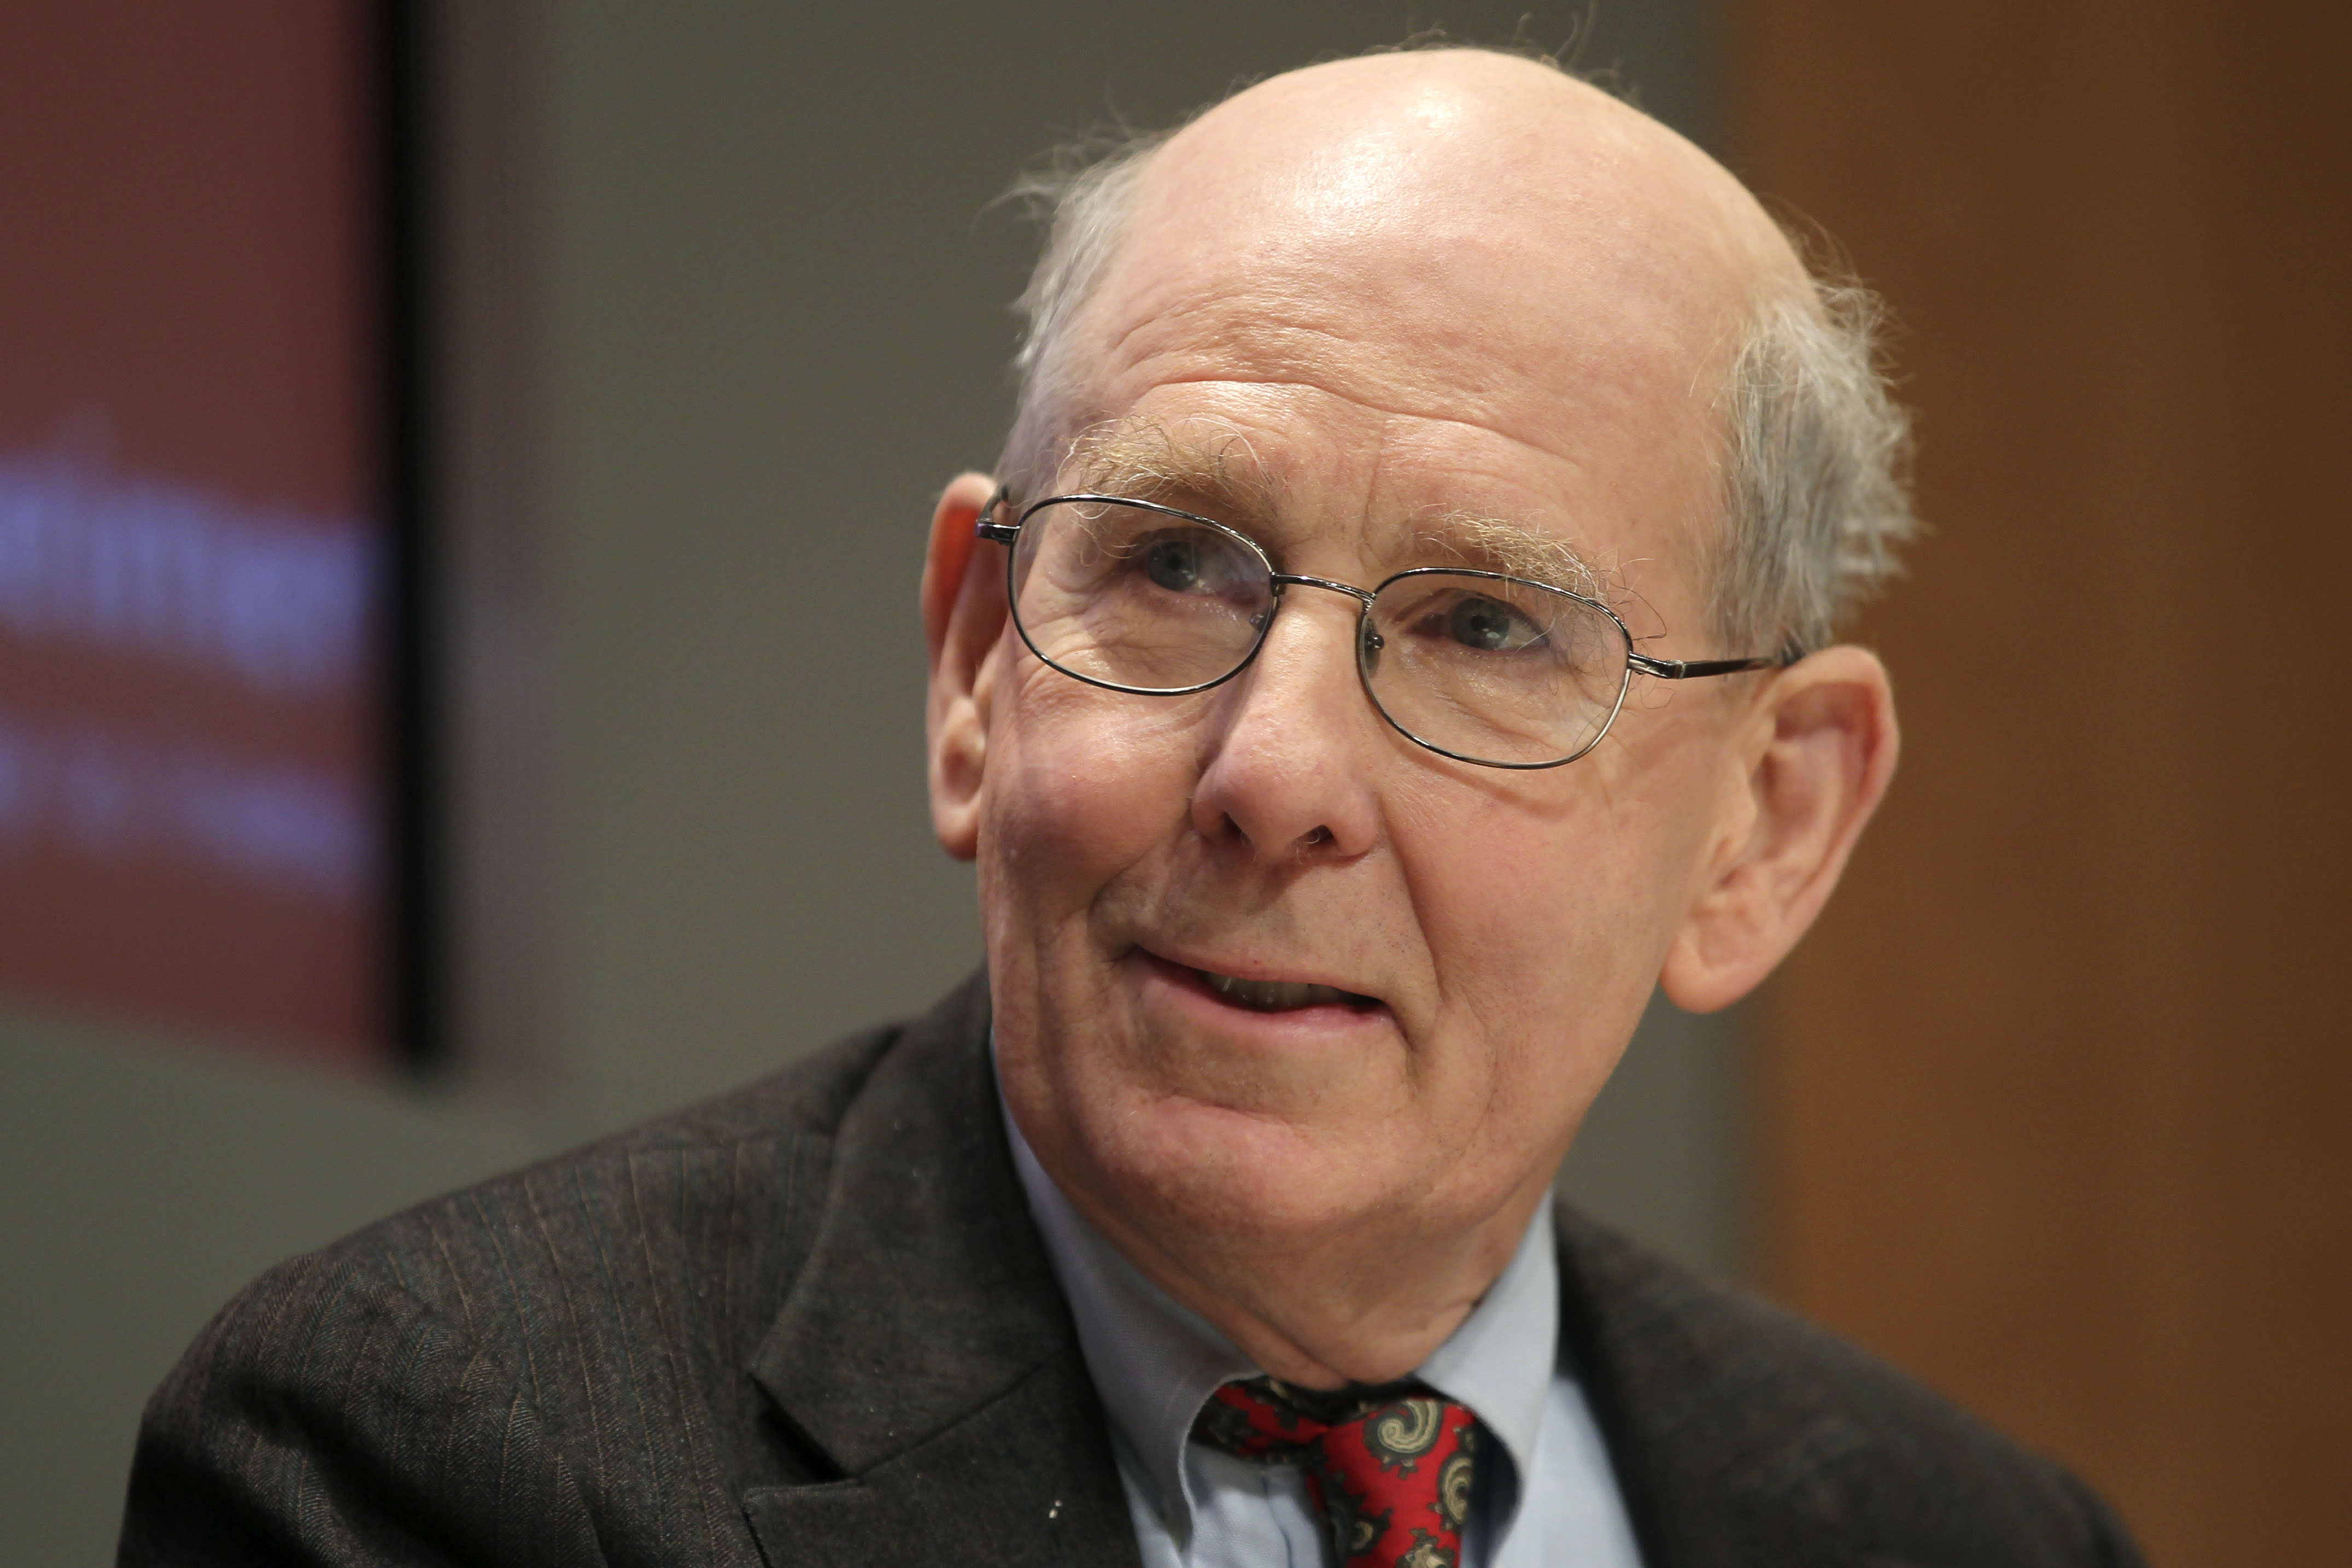 Economist Gary Shilling Warns of Continuing Recession Risk for U.S. Economy